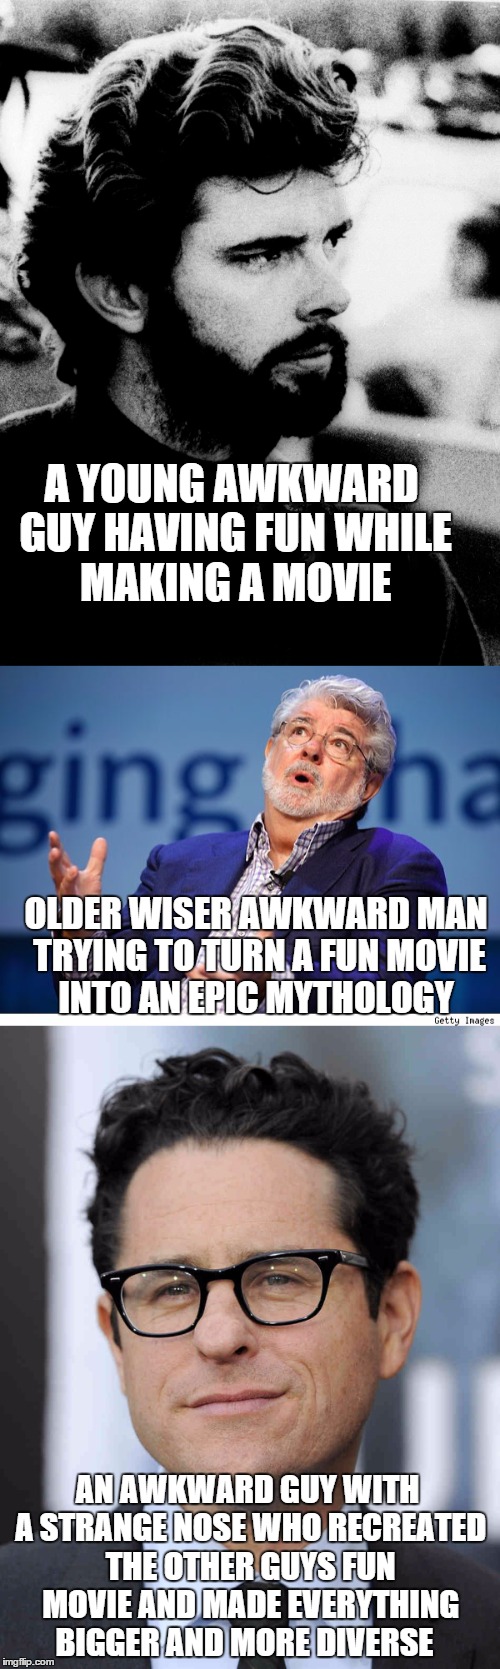 The evolution of Star Wars creators | A YOUNG AWKWARD GUY HAVING FUN WHILE MAKING A MOVIE; OLDER WISER AWKWARD MAN TRYING TO TURN A FUN MOVIE INTO AN EPIC MYTHOLOGY; AN AWKWARD GUY WITH A STRANGE NOSE WHO RECREATED THE OTHER GUYS FUN MOVIE AND MADE EVERYTHING BIGGER AND MORE DIVERSE | image tagged in memes,star wars,george lucas,jj abrams,movies | made w/ Imgflip meme maker